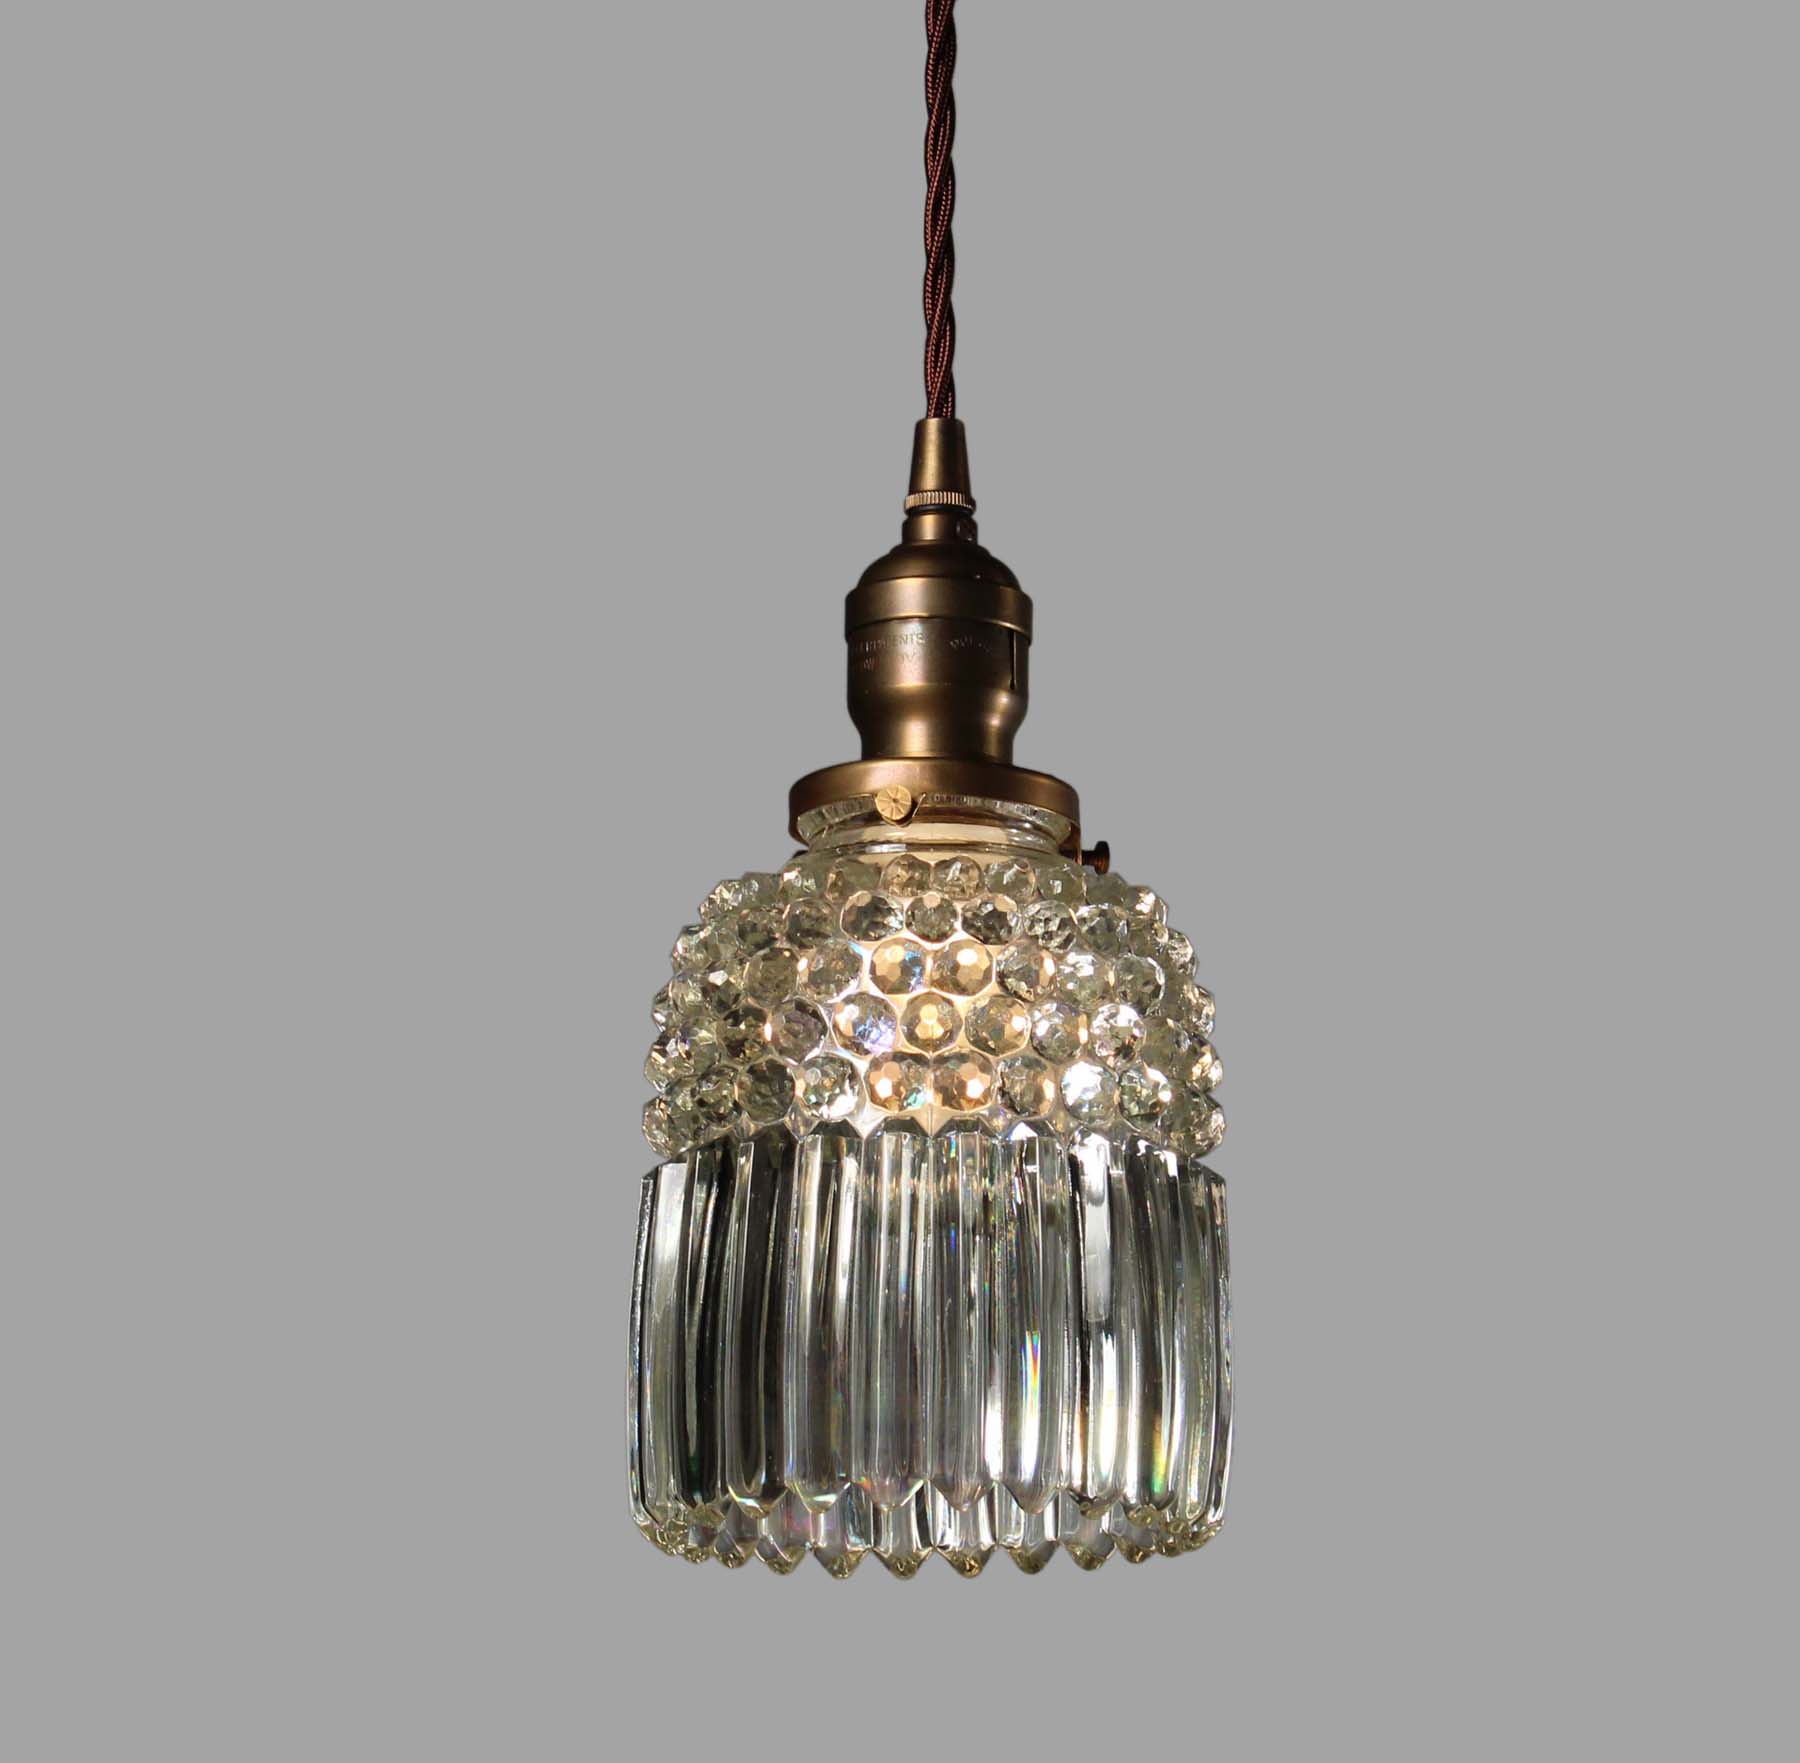 SOLD Antique Pendant Lights with Iridescent Glass Shades-68529